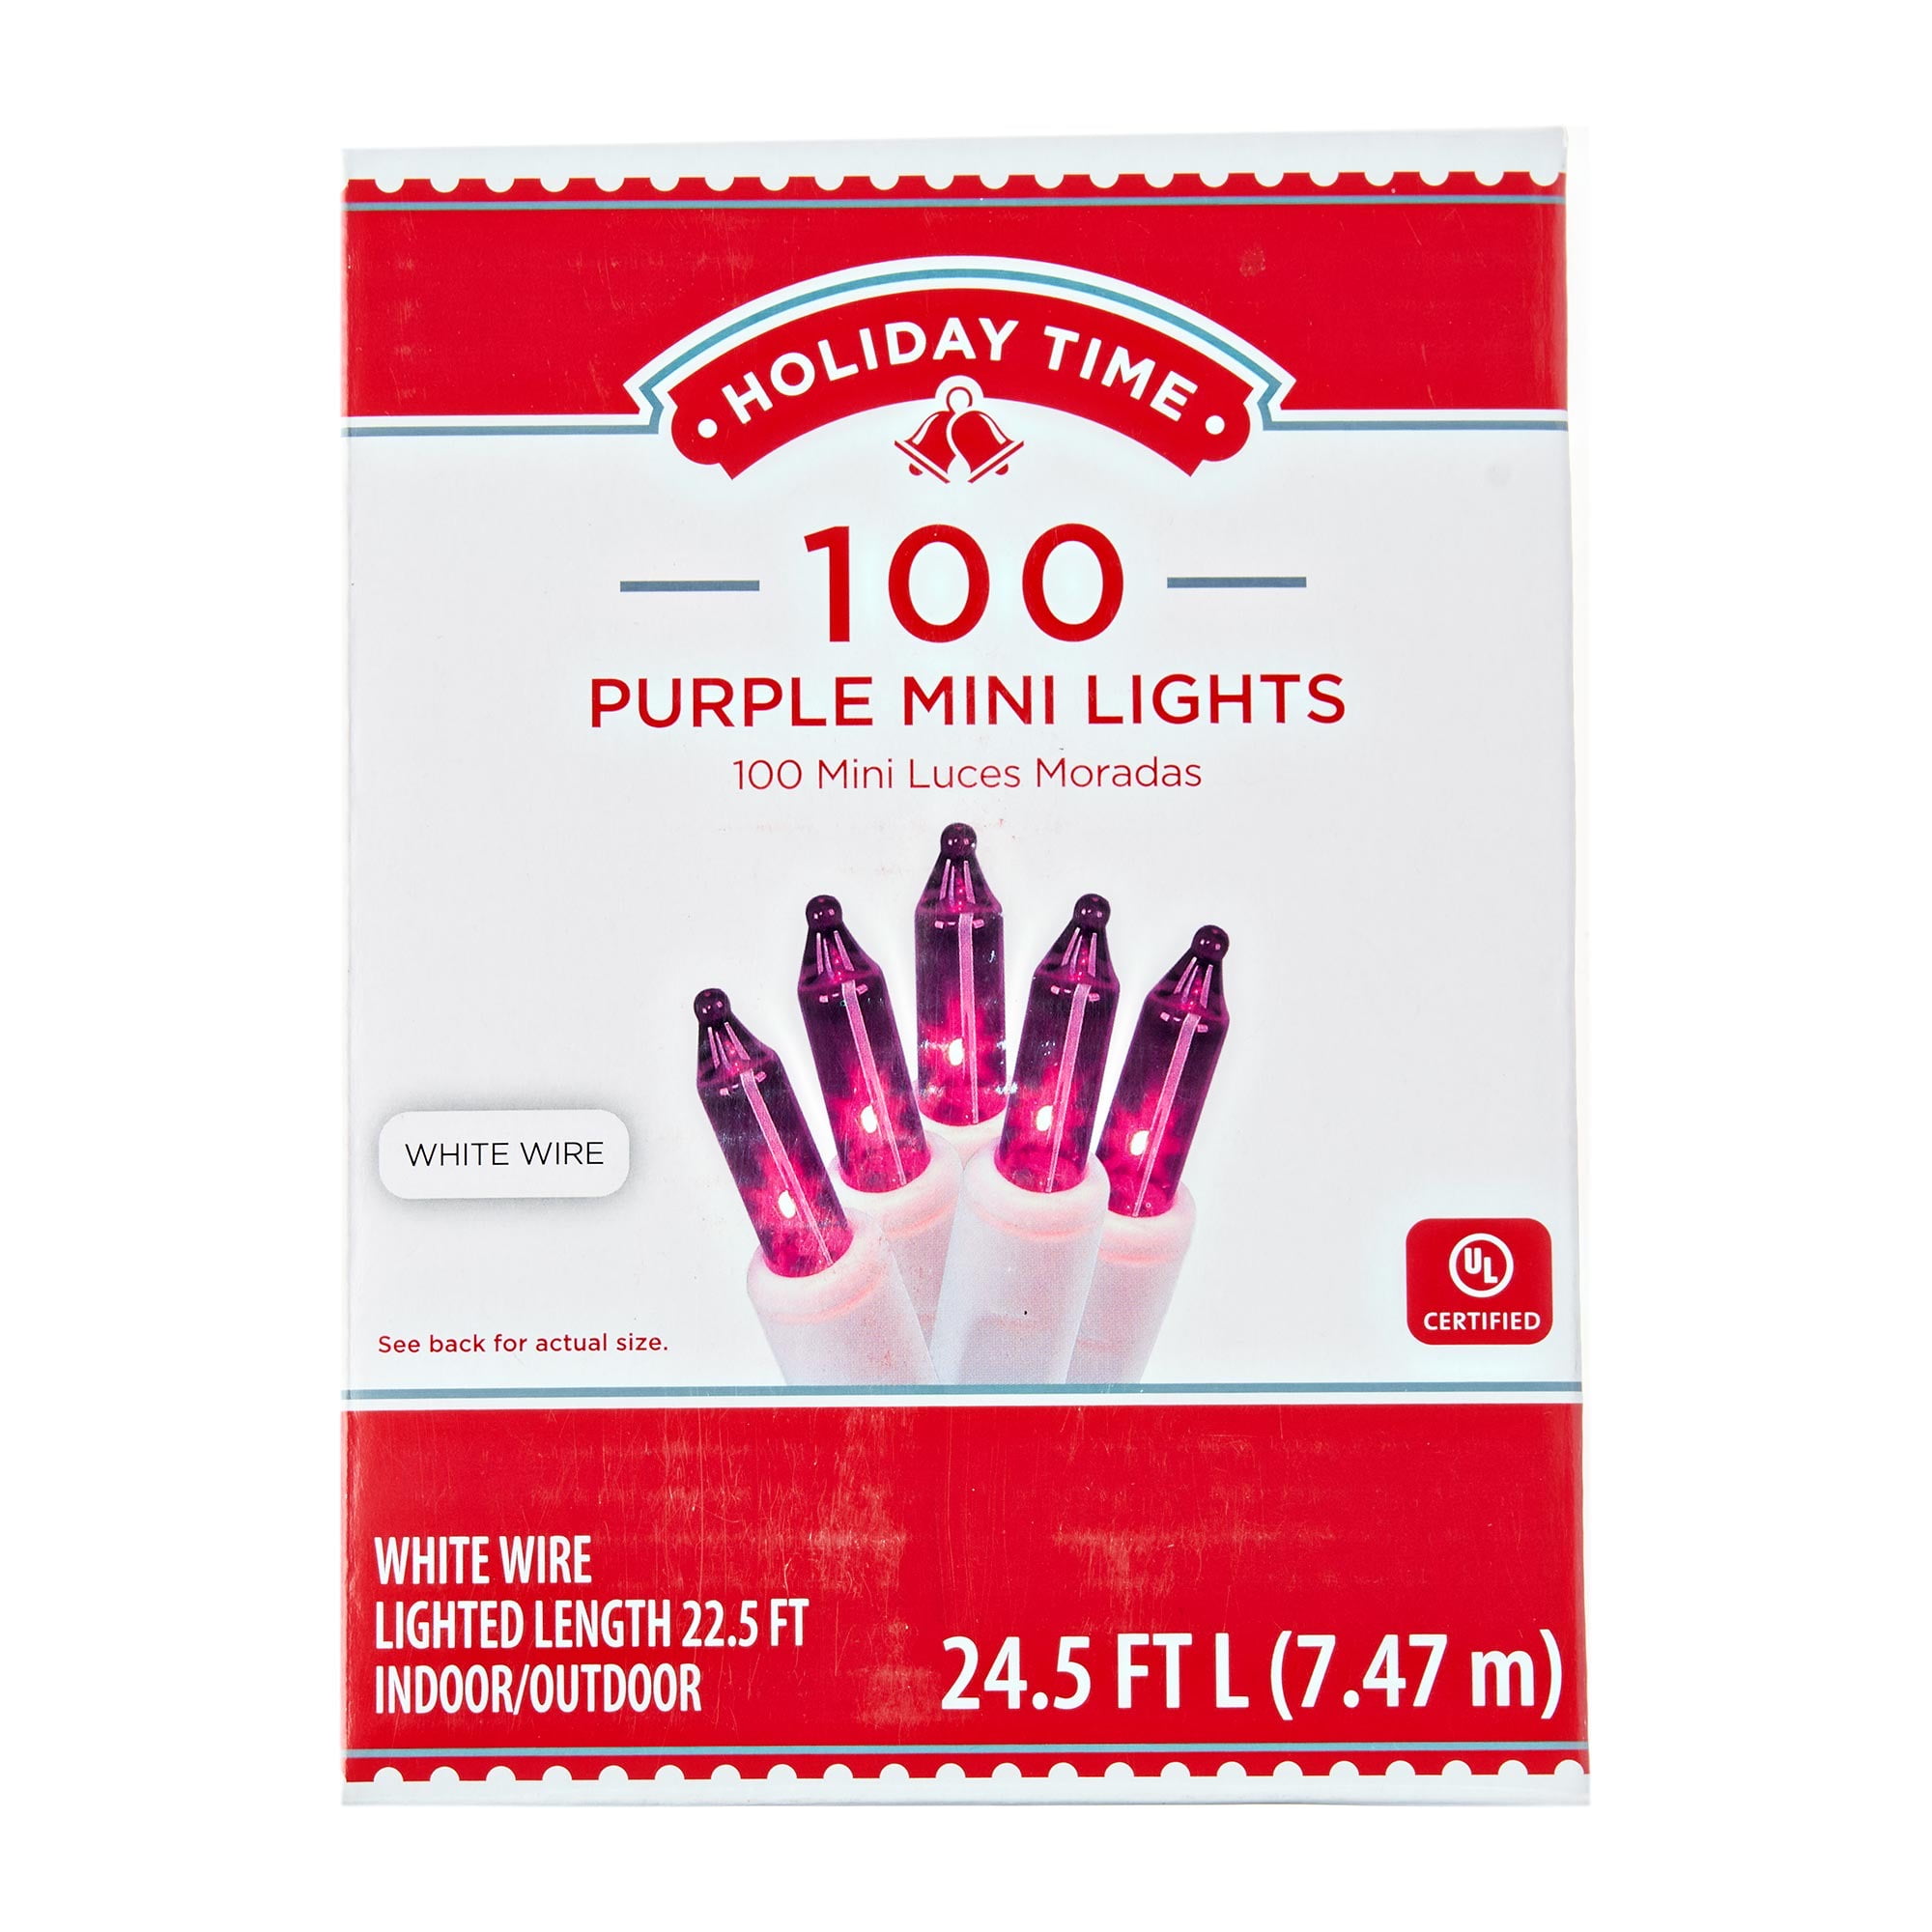 Details about   UL 100 Mini Christmas Light Set Purple 27 Ft Indoor/outdoor 120v 24w New !! 